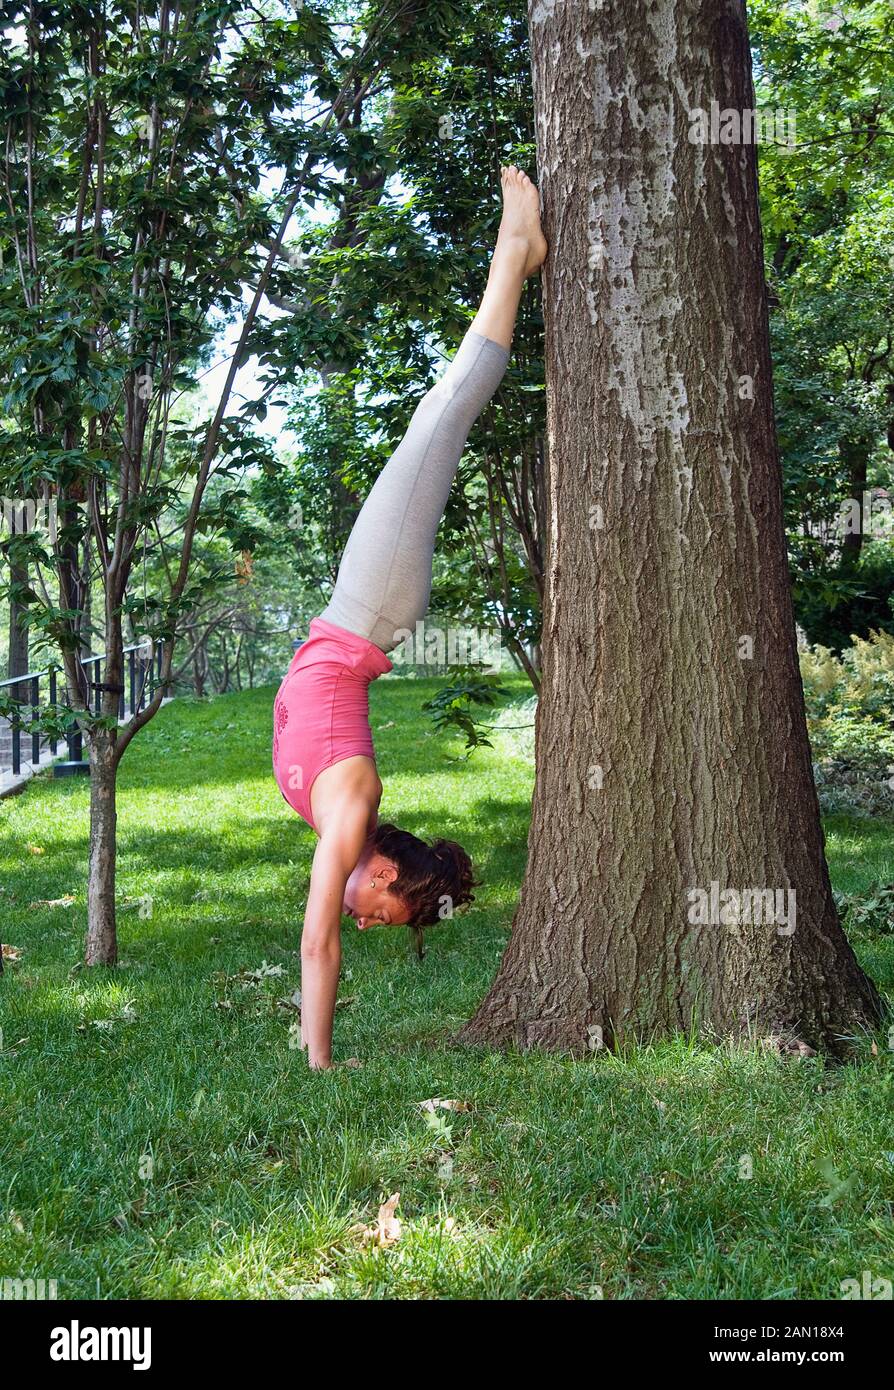 A woman doing a hand stand. Stock Photo